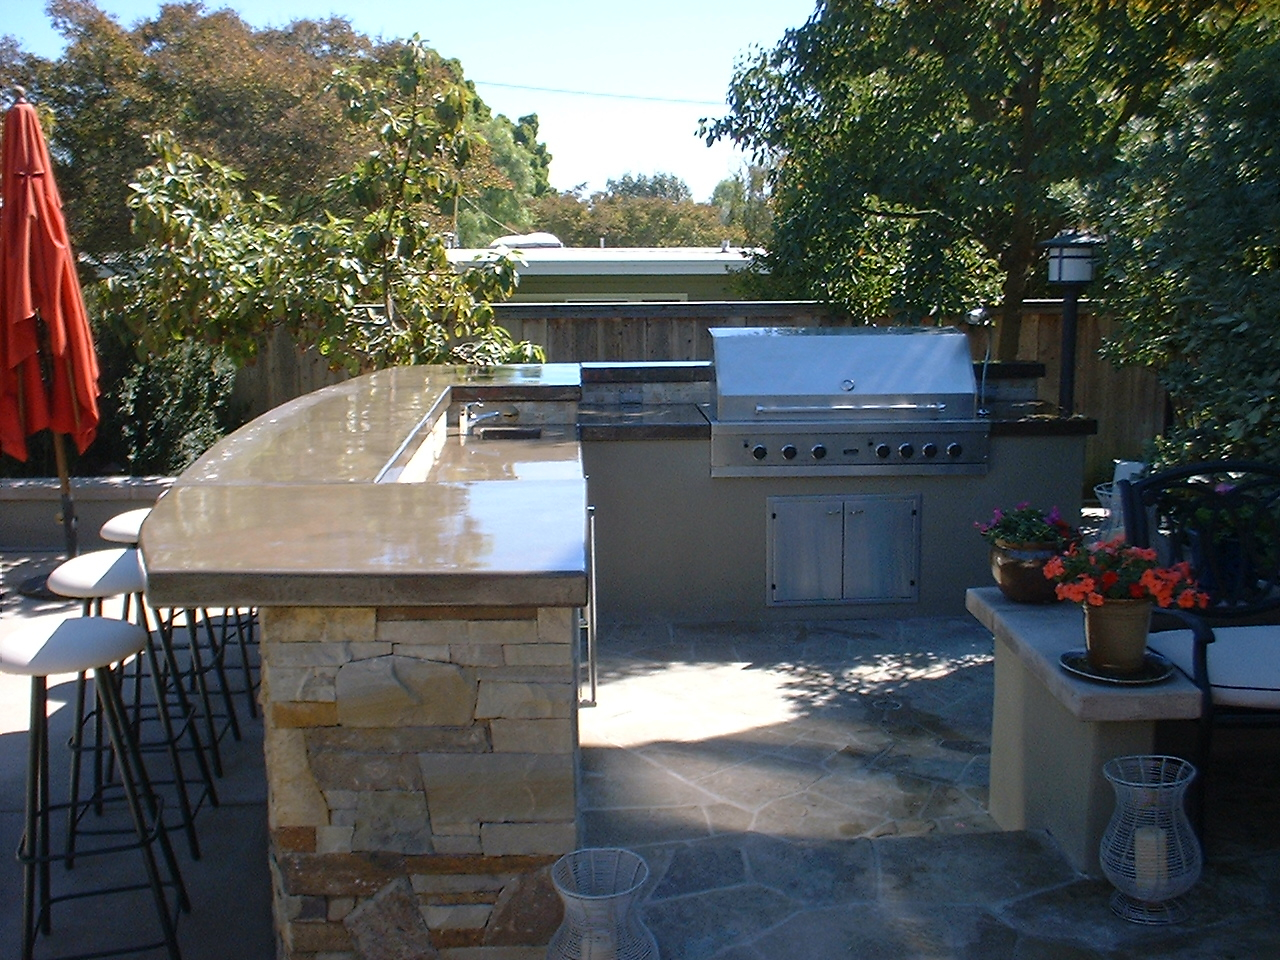 An Outdoor Kitchen Area With a Grill Install